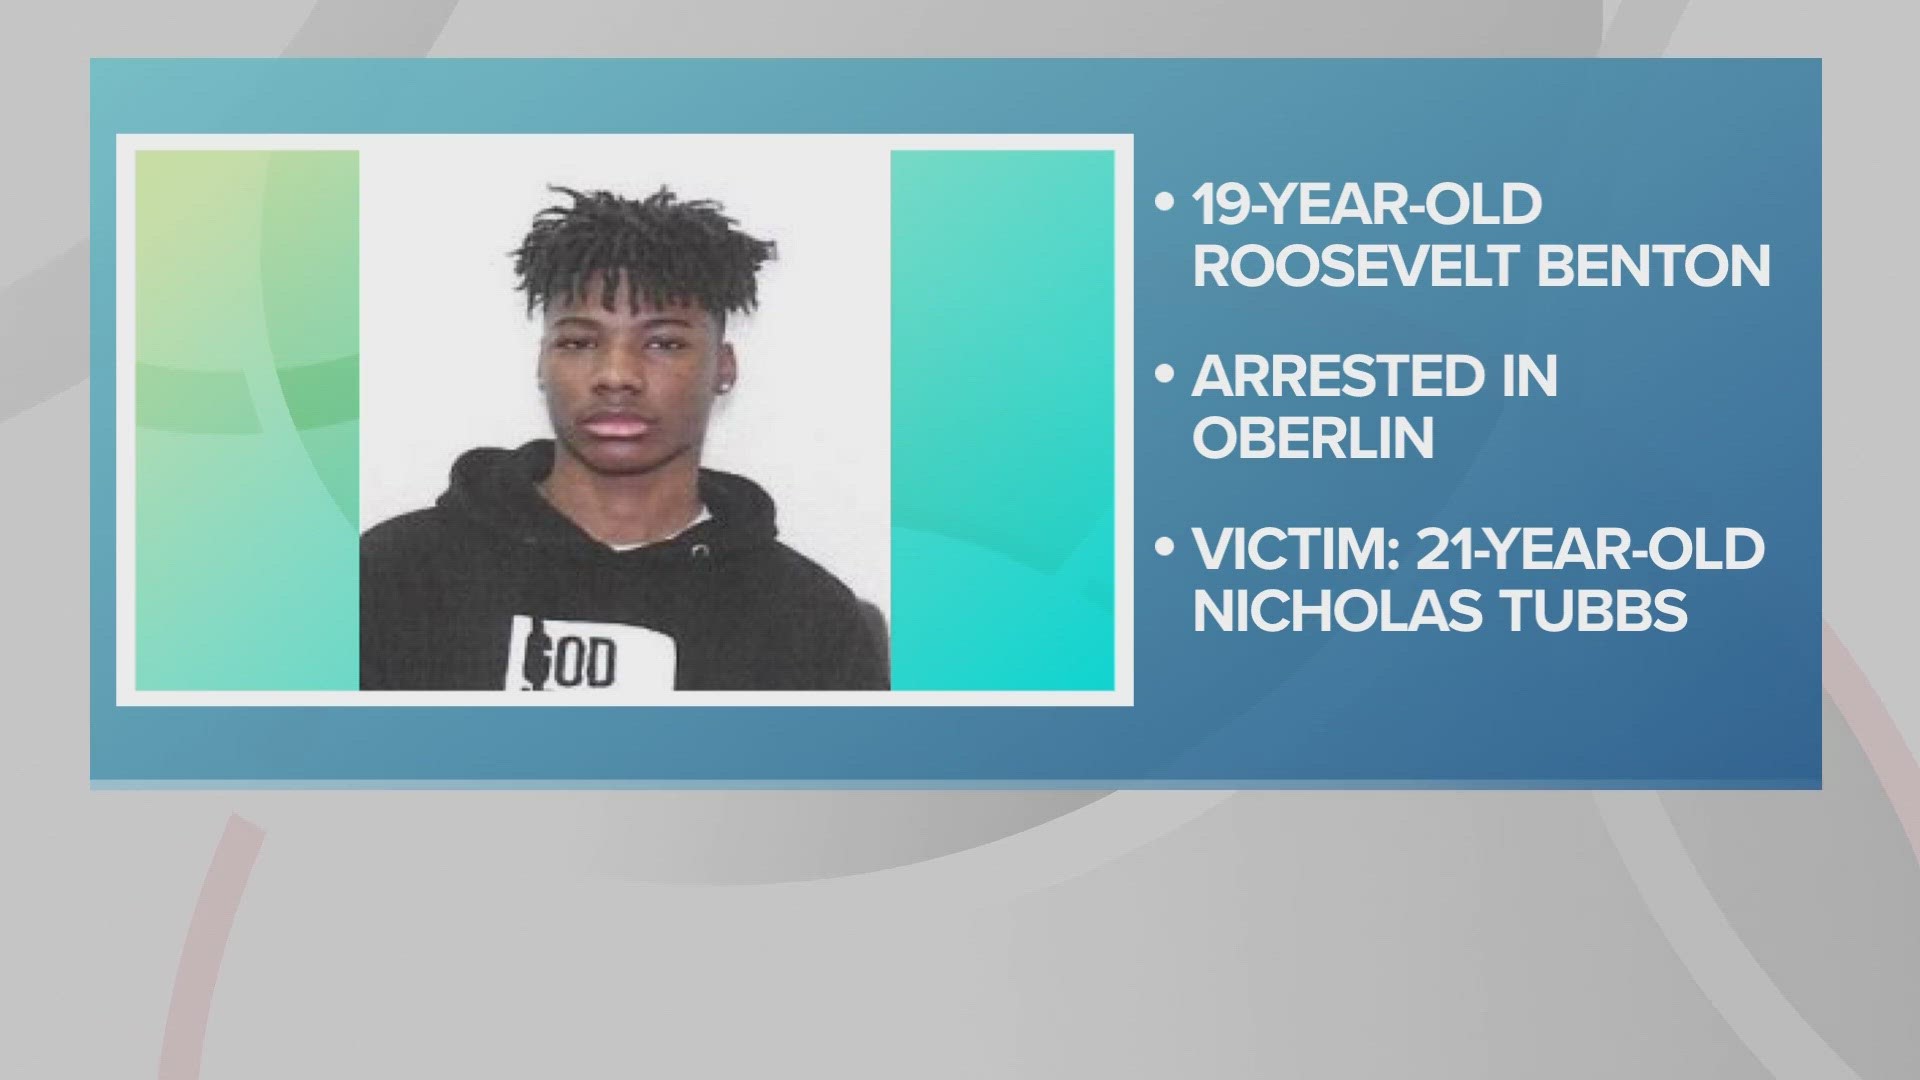 Elyria police arrested 19-year-old Roosevelt Benton for felonious assault and say additional criminal charges are expected.